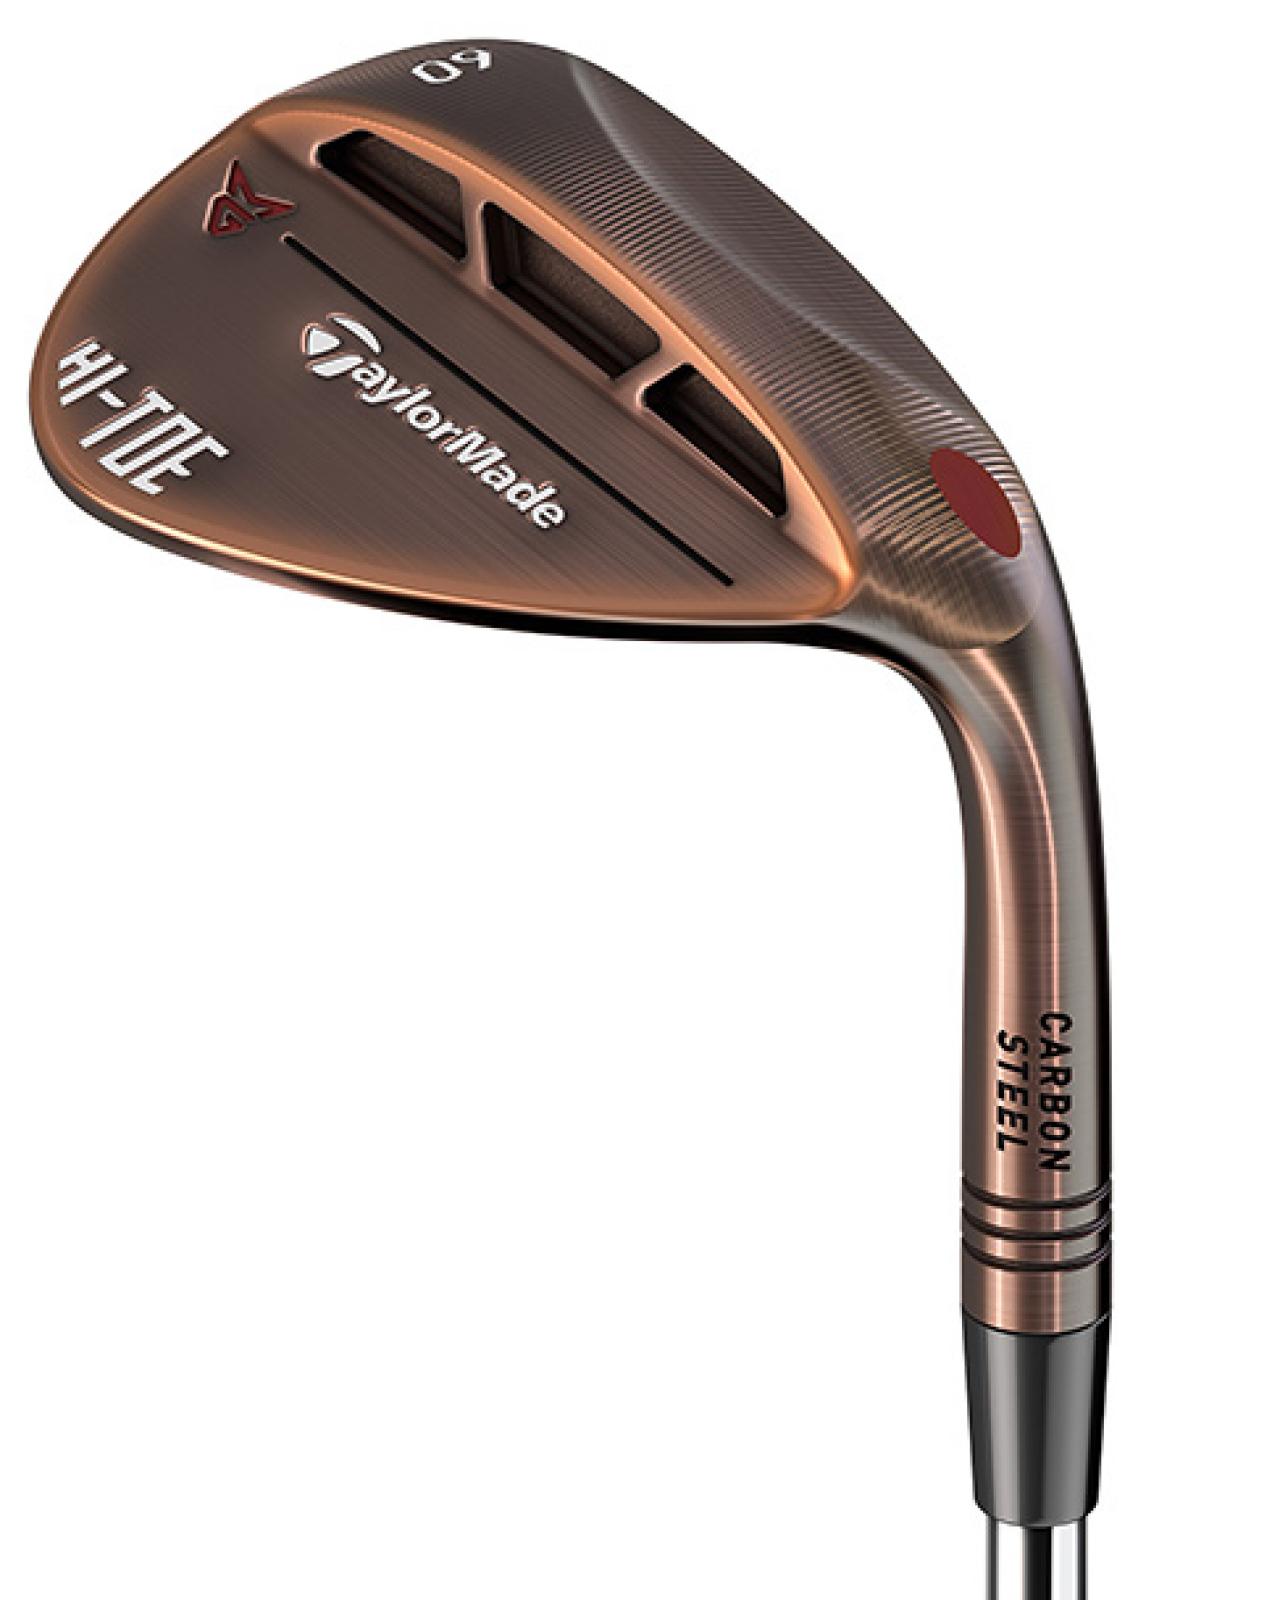 TaylorMade Hi-Toe wedge expands Milled Grind line with high-lofted